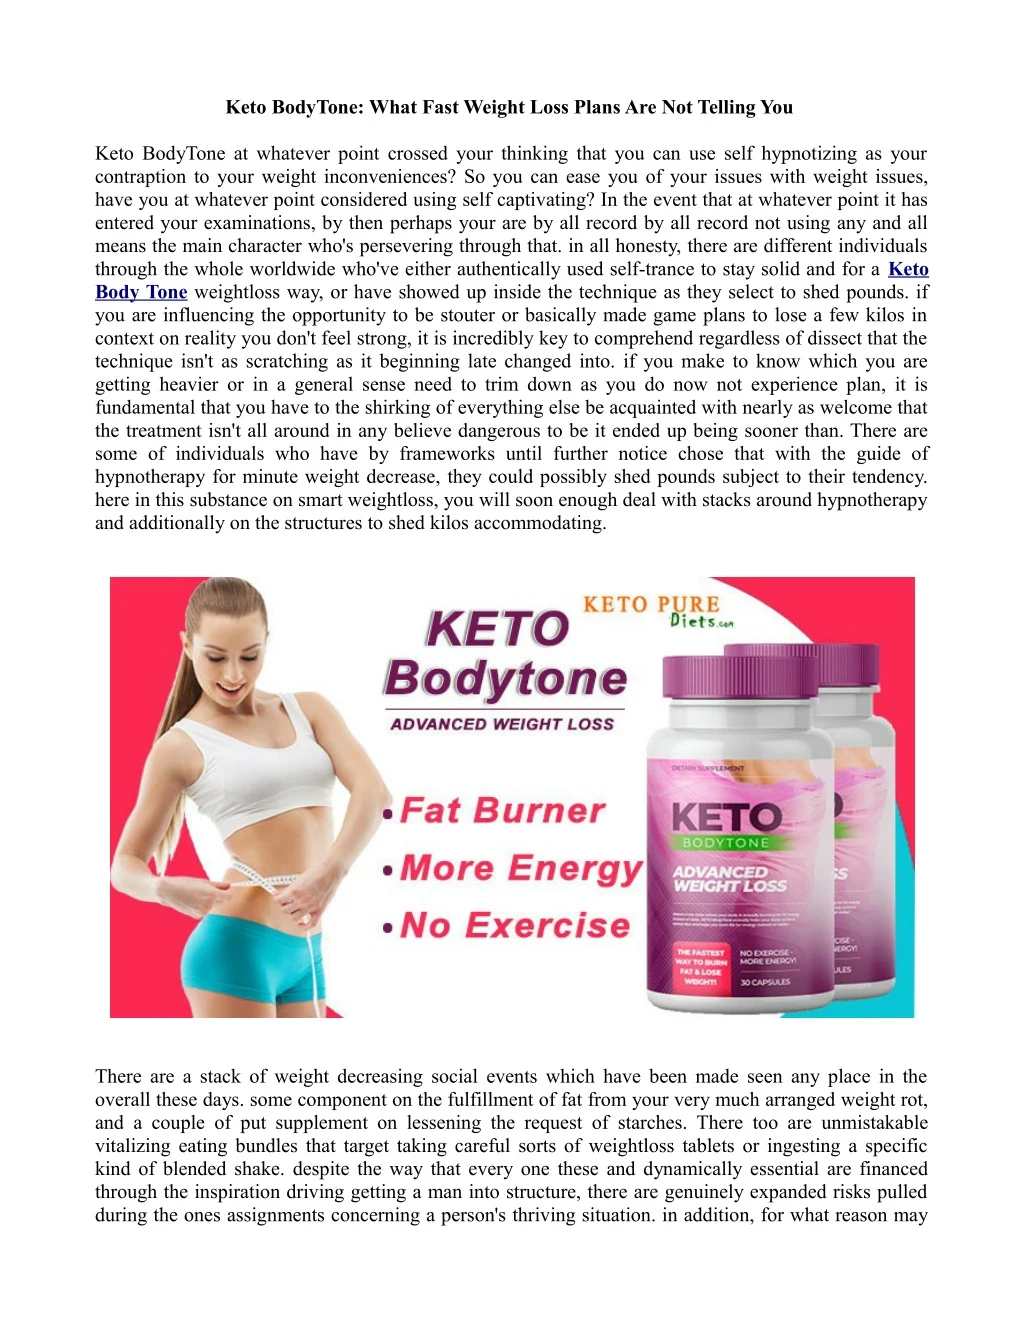 keto bodytone what fast weight loss plans